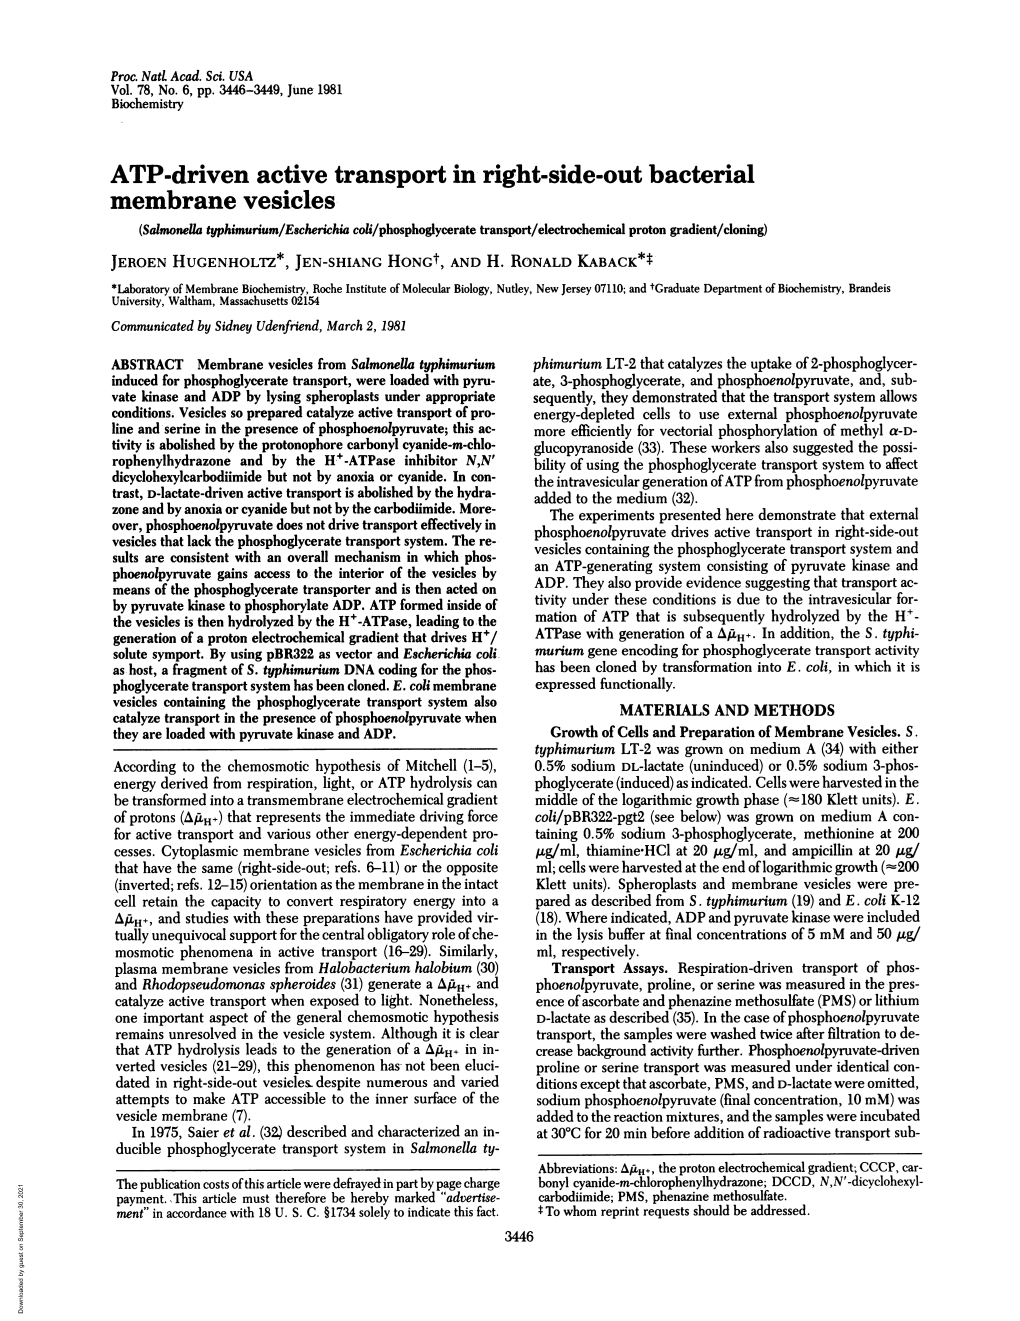 ATP-Driven Active Transport in Right-Side-Out Bacterial Membrane